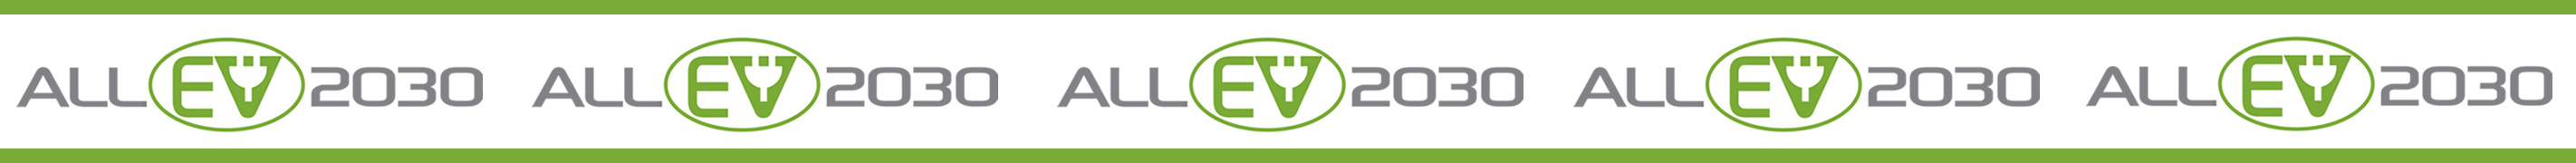 Go to the All EV 2030 page